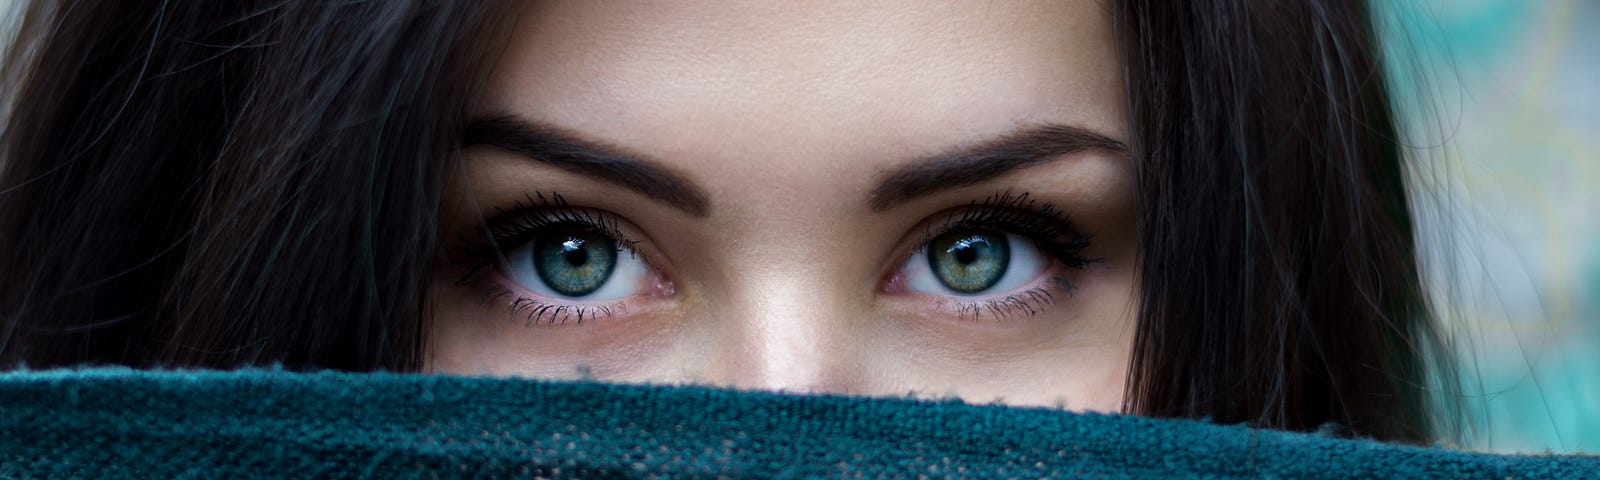 Woman’s eyes looking over a barrier that covers the bottom half of her face